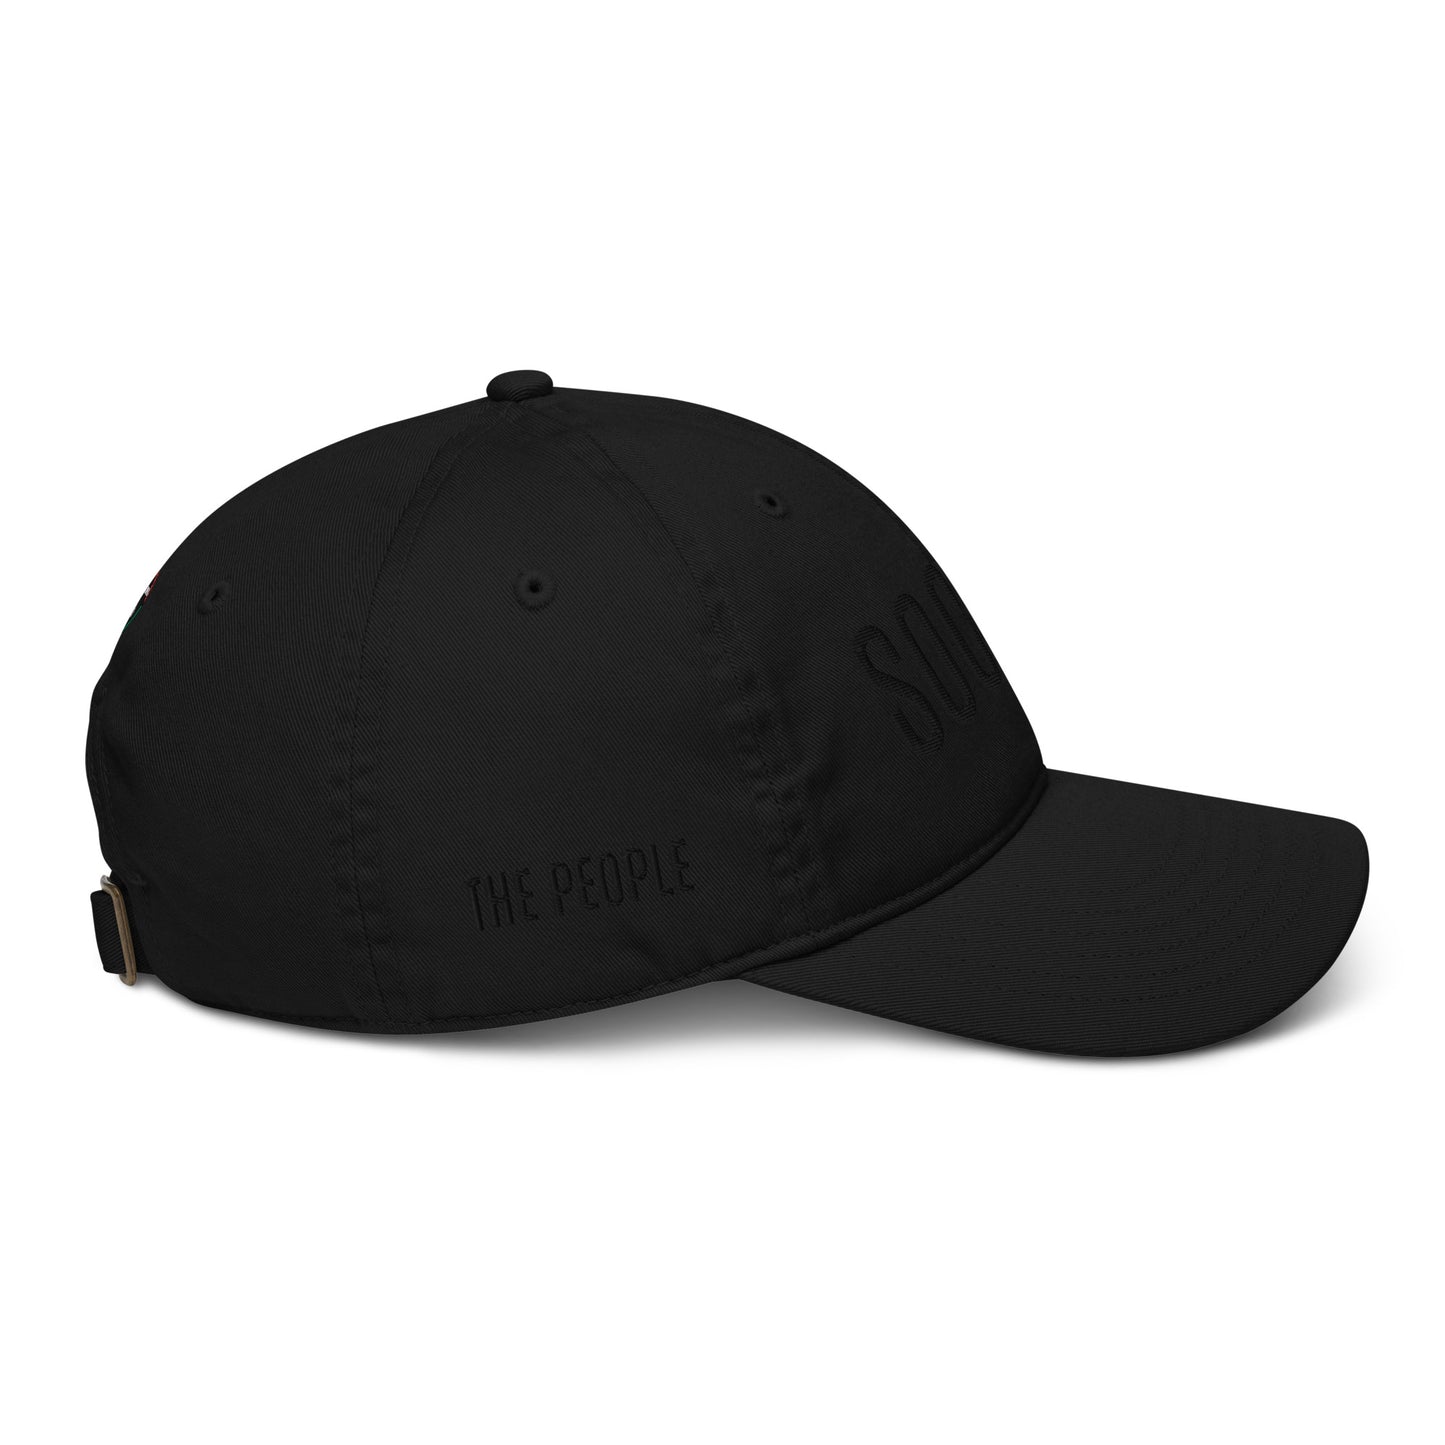 THE ROUNDABOUT ORGANIC DAD HAT